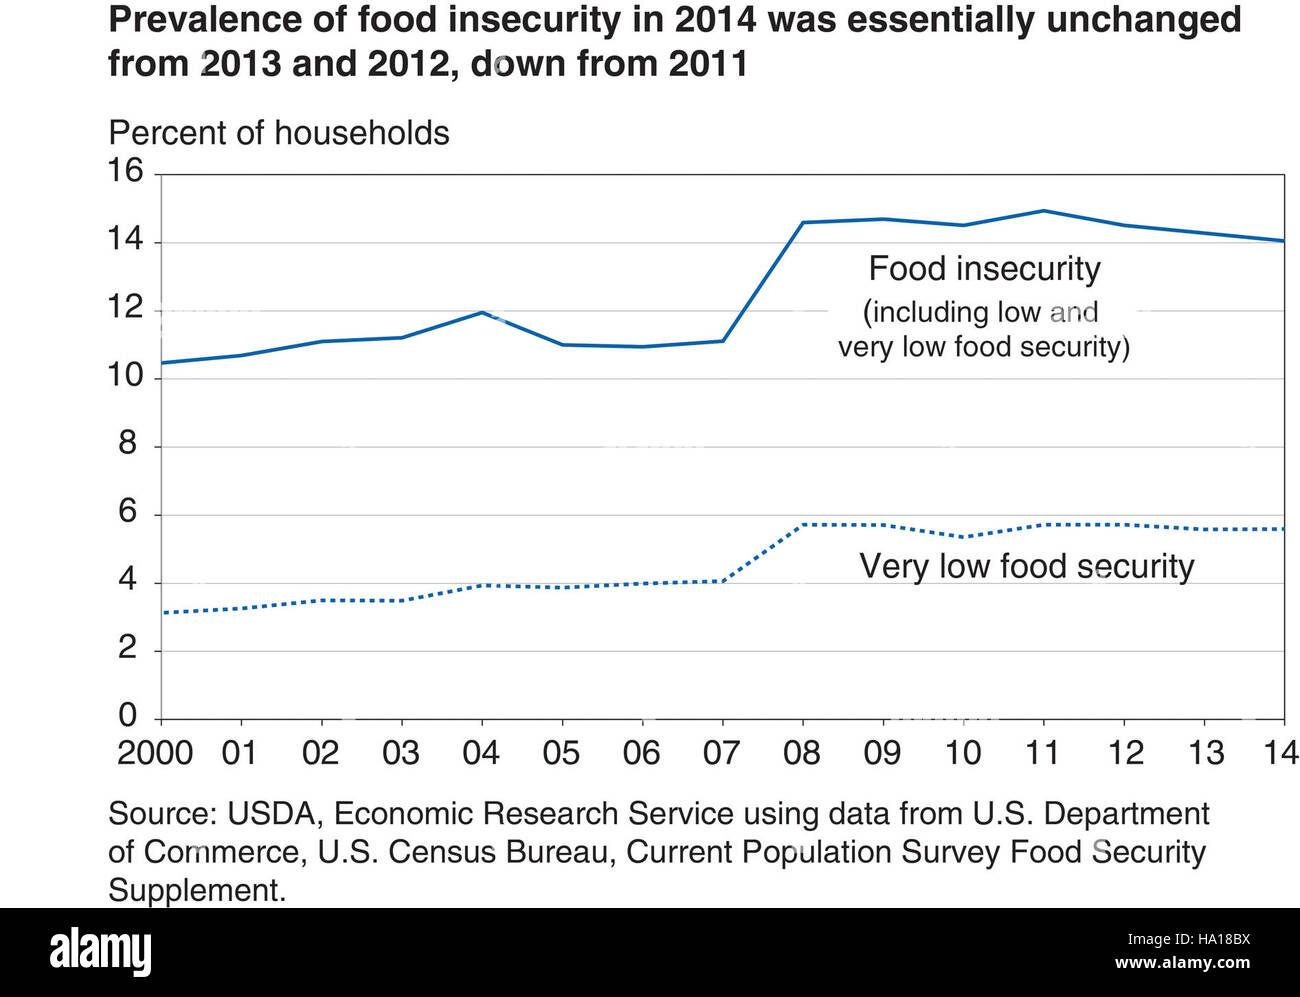 usdagov 21262382742 Prevalence of food security in 2014 was essentially unchanged from 2013 and 2012, down from 2011 chart Stock Photo